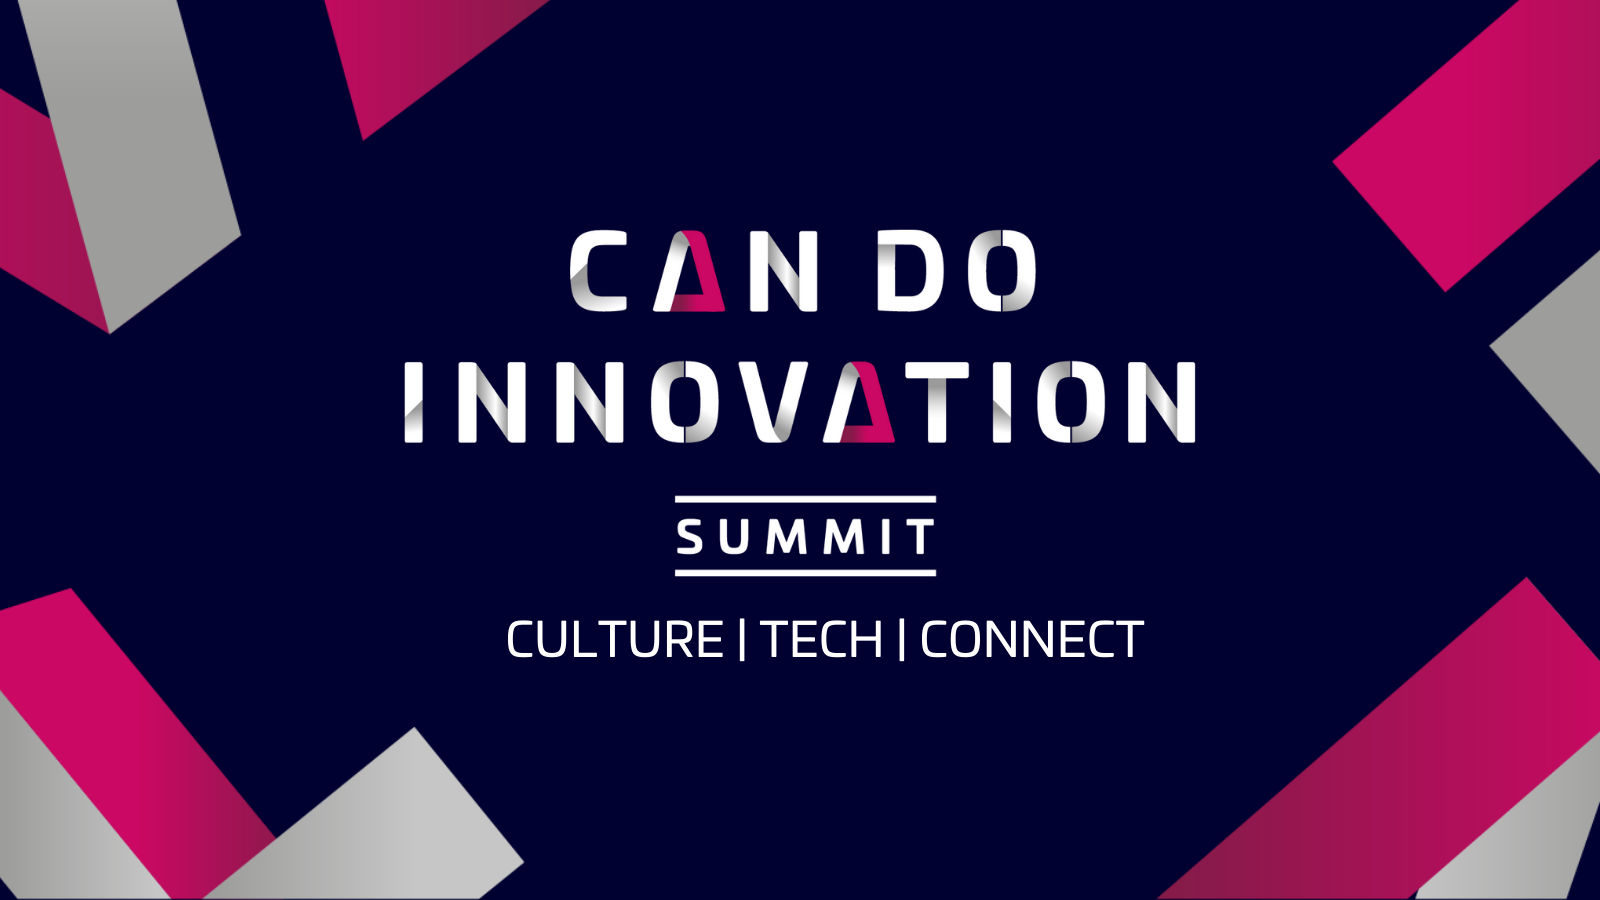 Innovate UK KTN supports Scotland’s CAN DO Innovation Summit